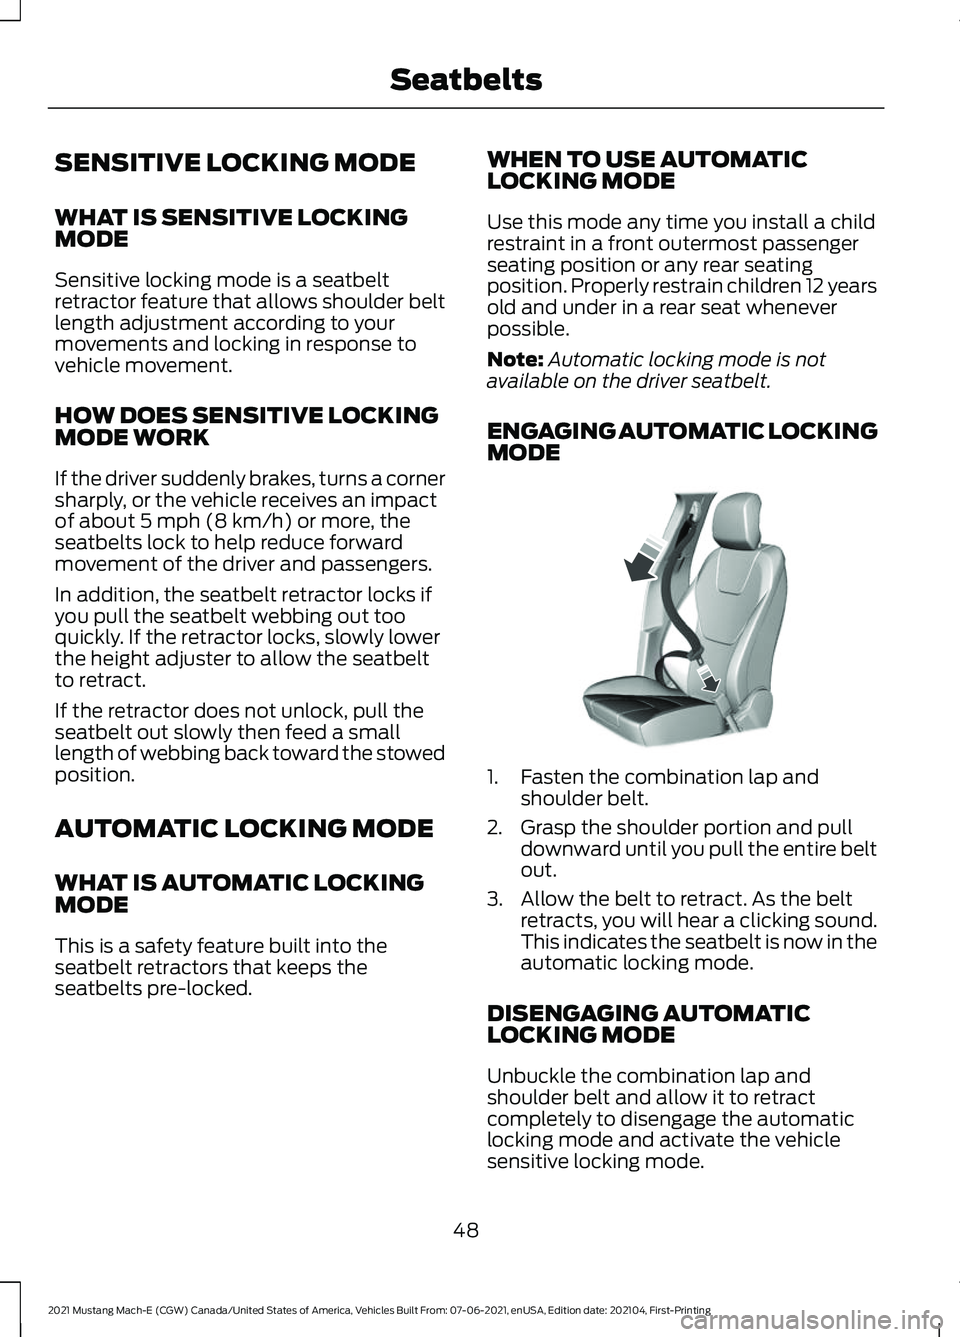 FORD MUSTANG MACH-E 2021  Owners Manual SENSITIVE LOCKING MODE
WHAT IS SENSITIVE LOCKING
MODE
Sensitive locking mode is a seatbelt
retractor feature that allows shoulder belt
length adjustment according to your
movements and locking in resp